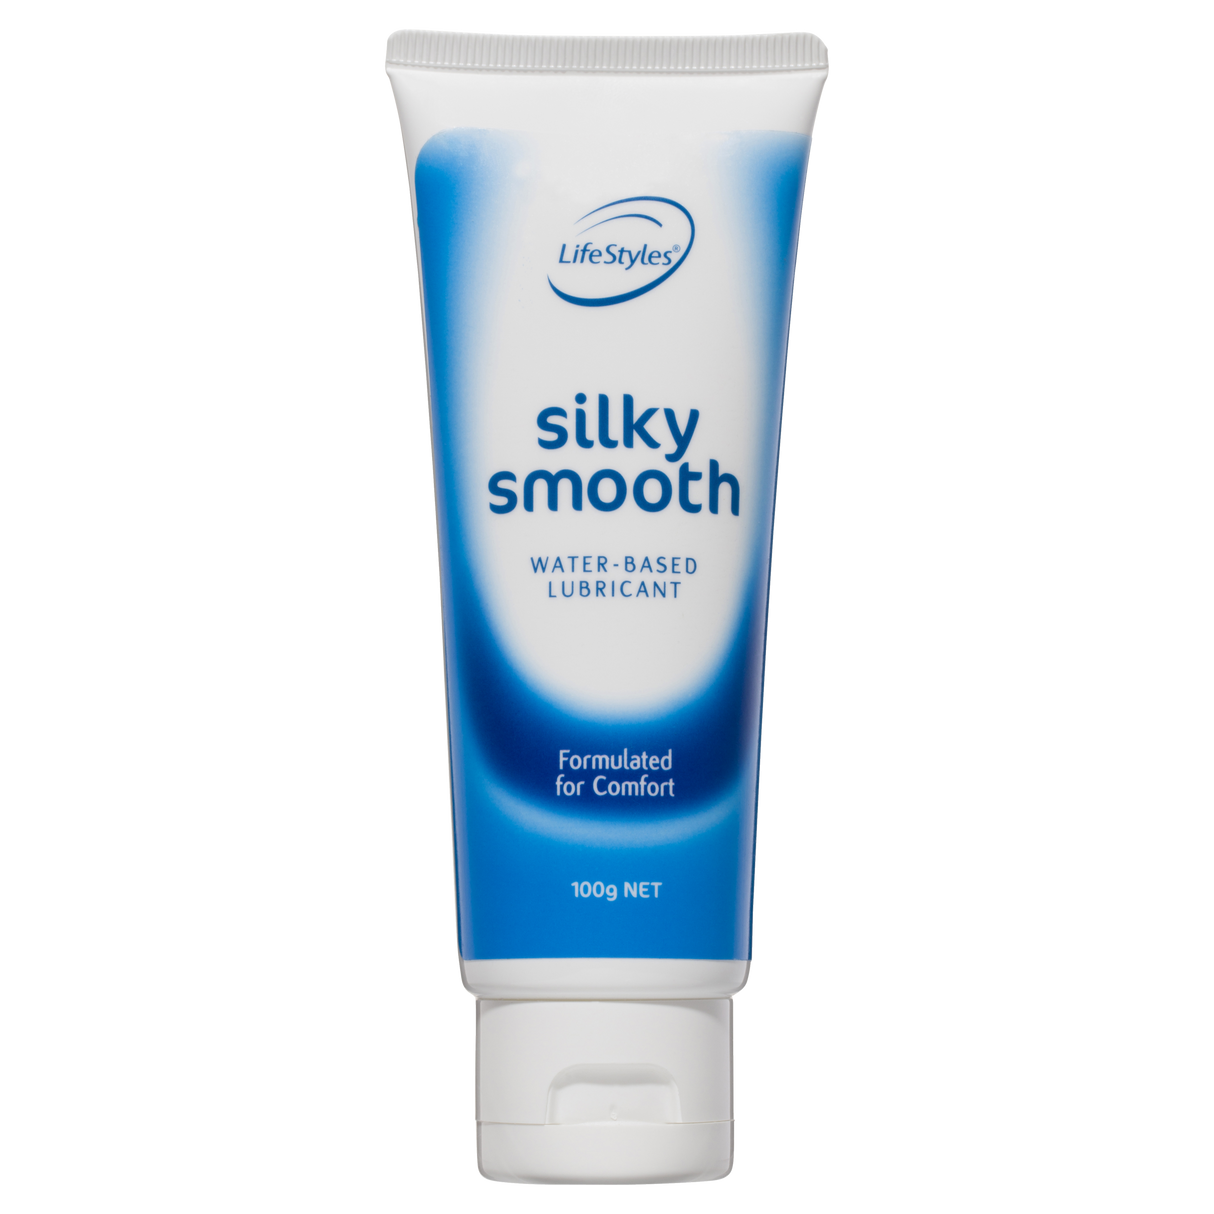 LifeStyles Silky Smooth Water-based Lubricant 100g